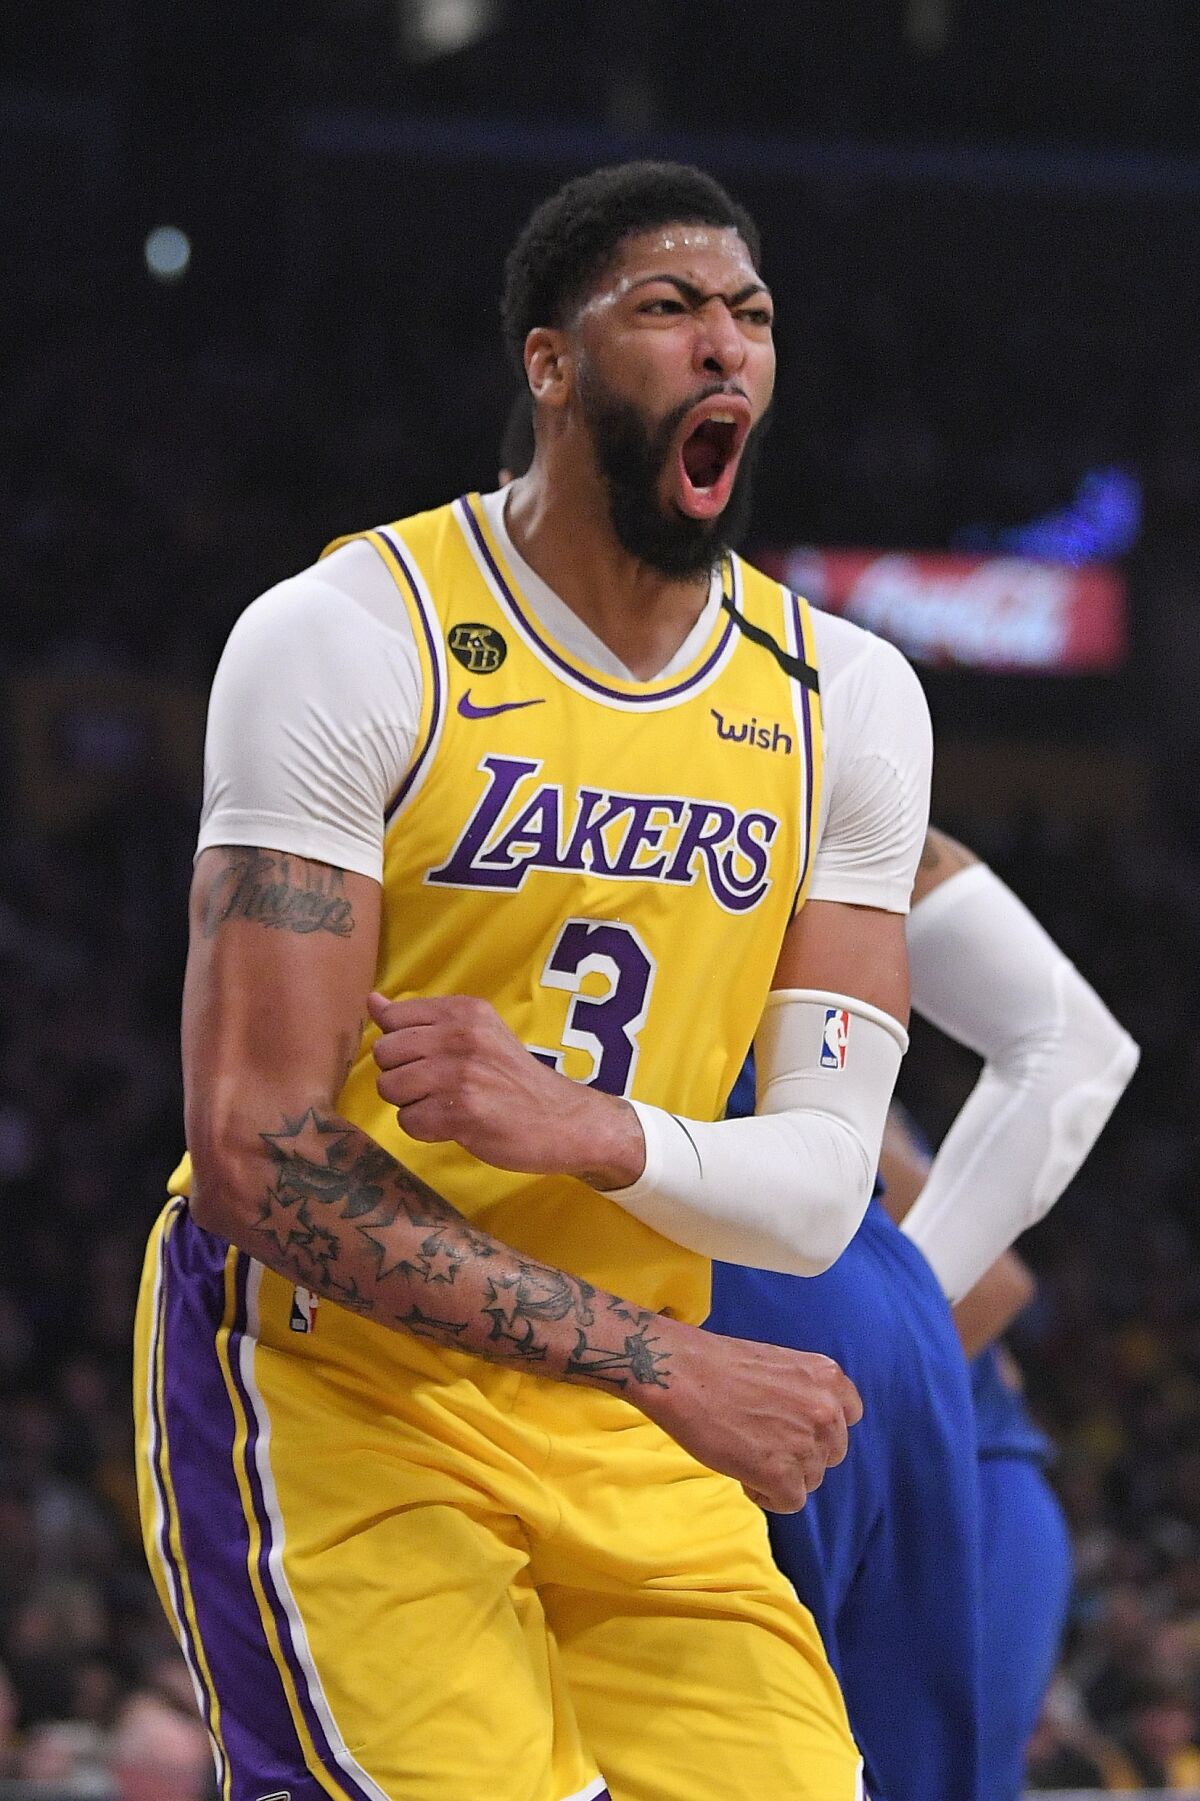 Los Angeles Lakers forward Anthony Davis celebrates after scoring during the first half of an NBA basketball game against the Philadelphia 76ers Tuesday, March 3, 2020, in Los Angeles. (AP Photo/Mark J. Terrill)